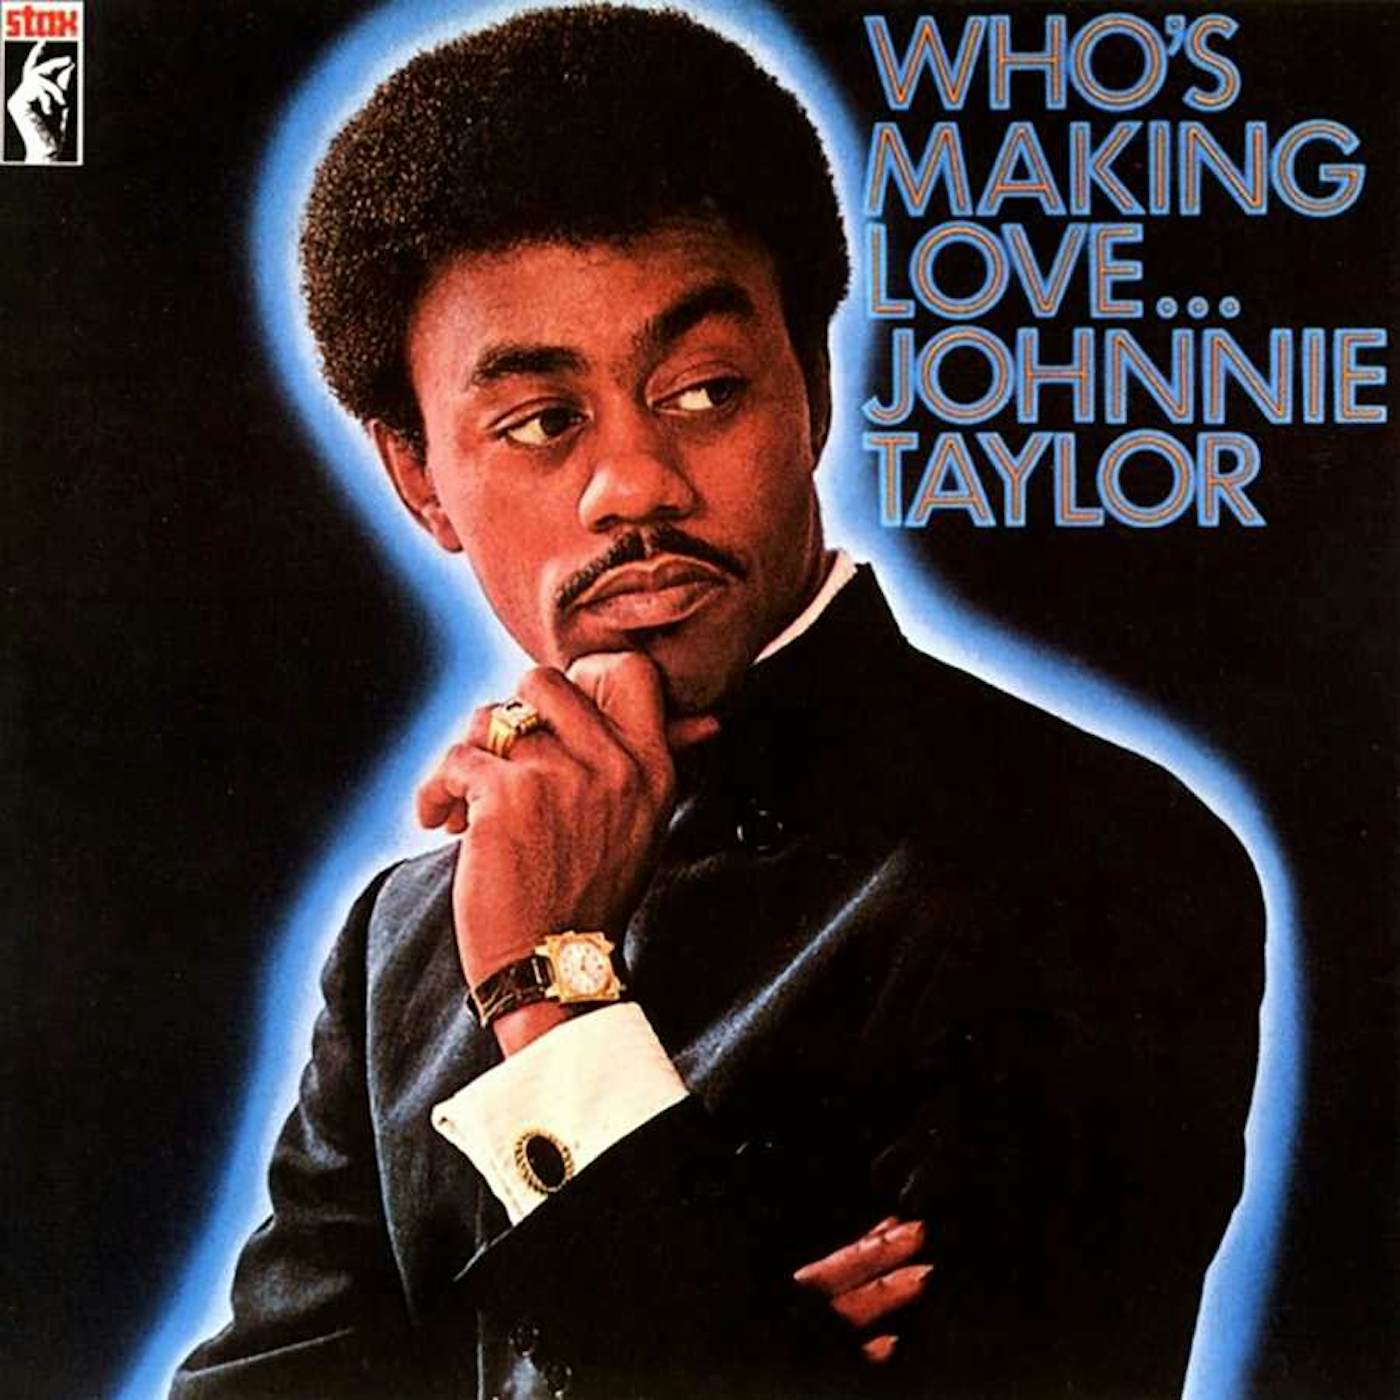 Johnnie Taylor WHO'S MAKING LOVE Vinyl Record